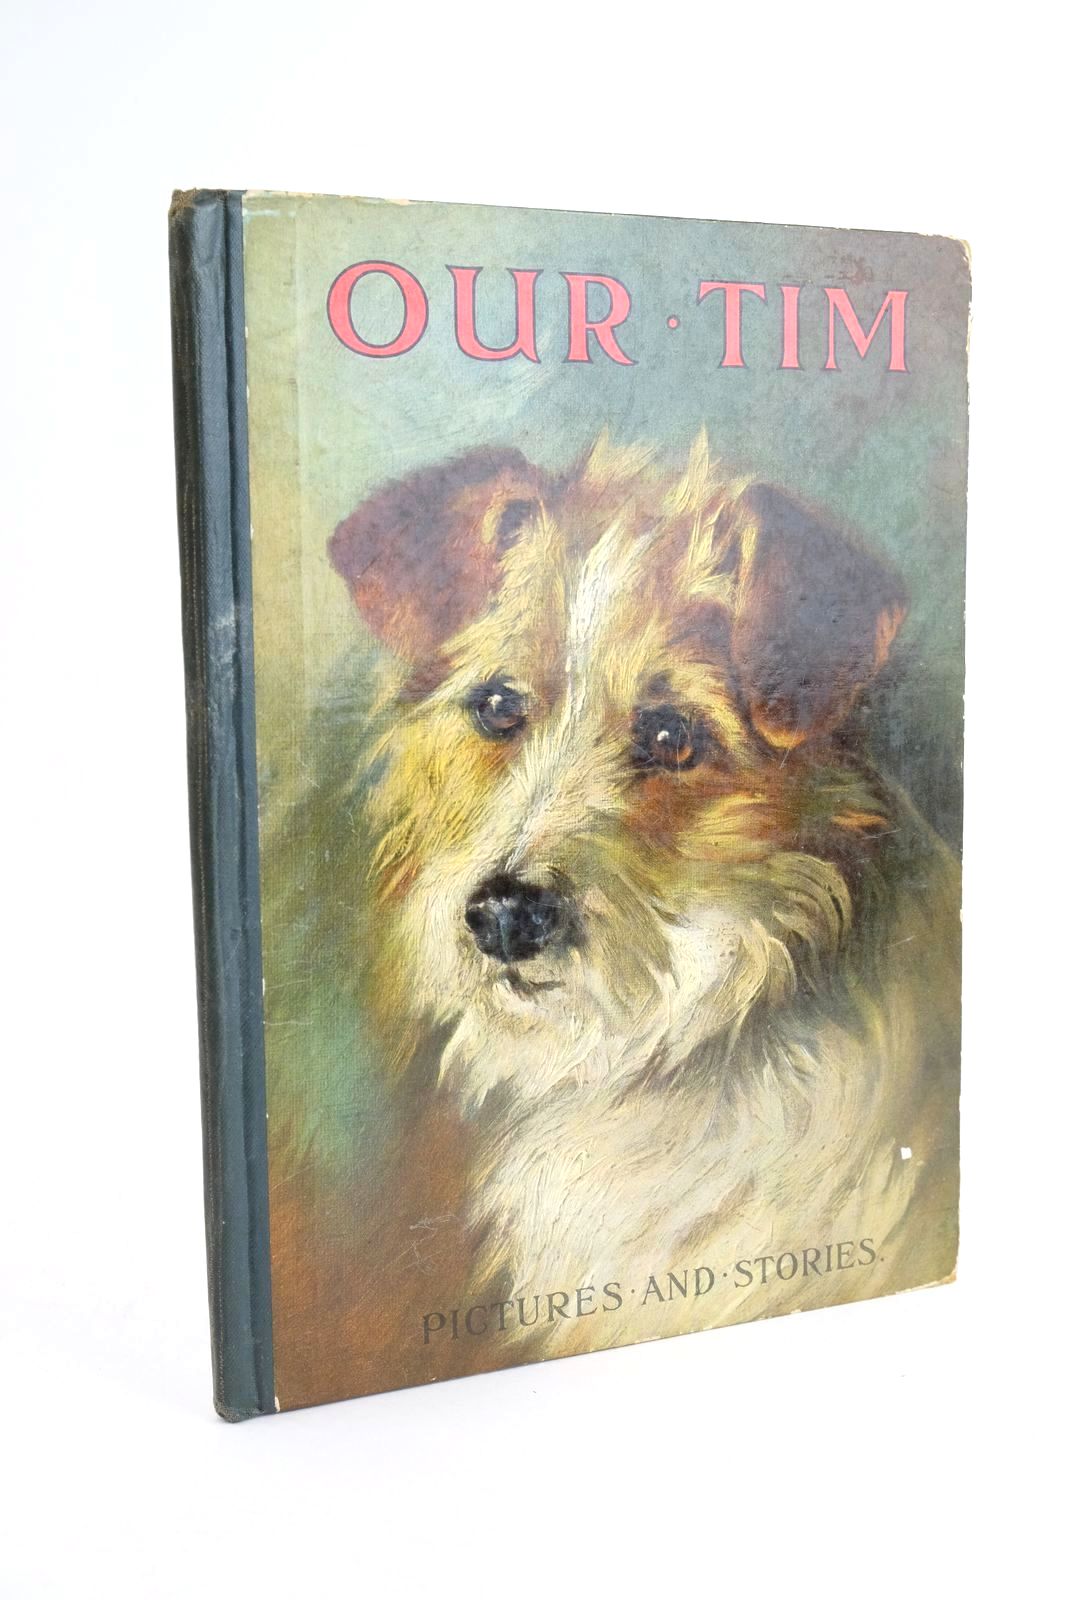 Photo of OUR TIM PICTURES & STORIES- Stock Number: 1323683